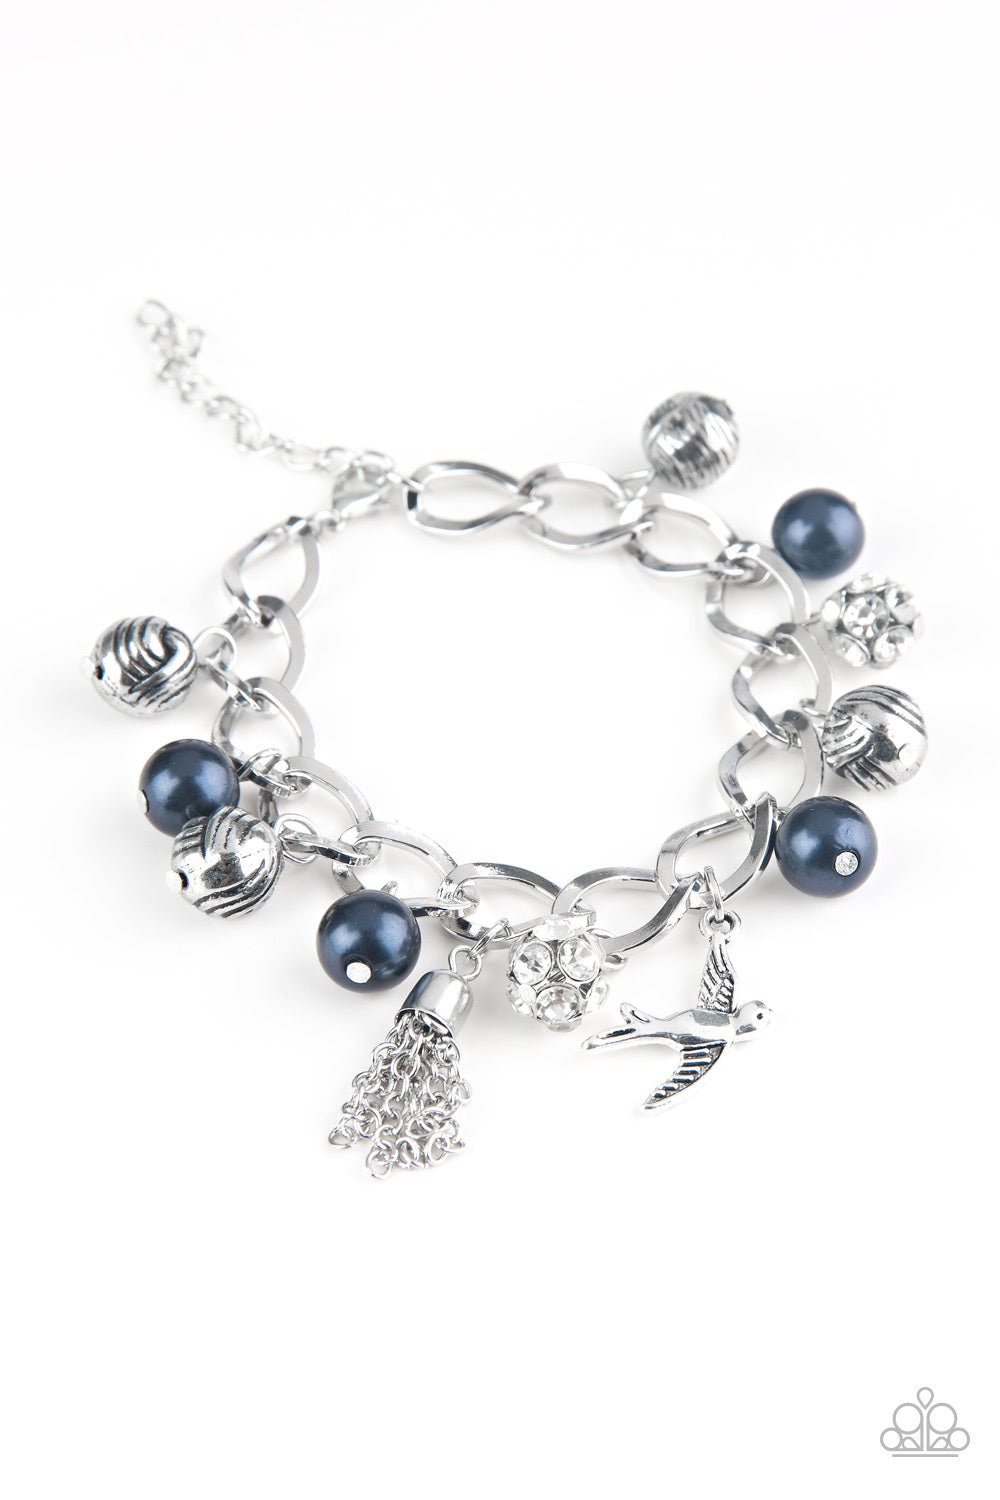 Copy of Paparazzi Lady Love Dove - Blue Pearls Bracelet - A Finishing Touch Jewelry